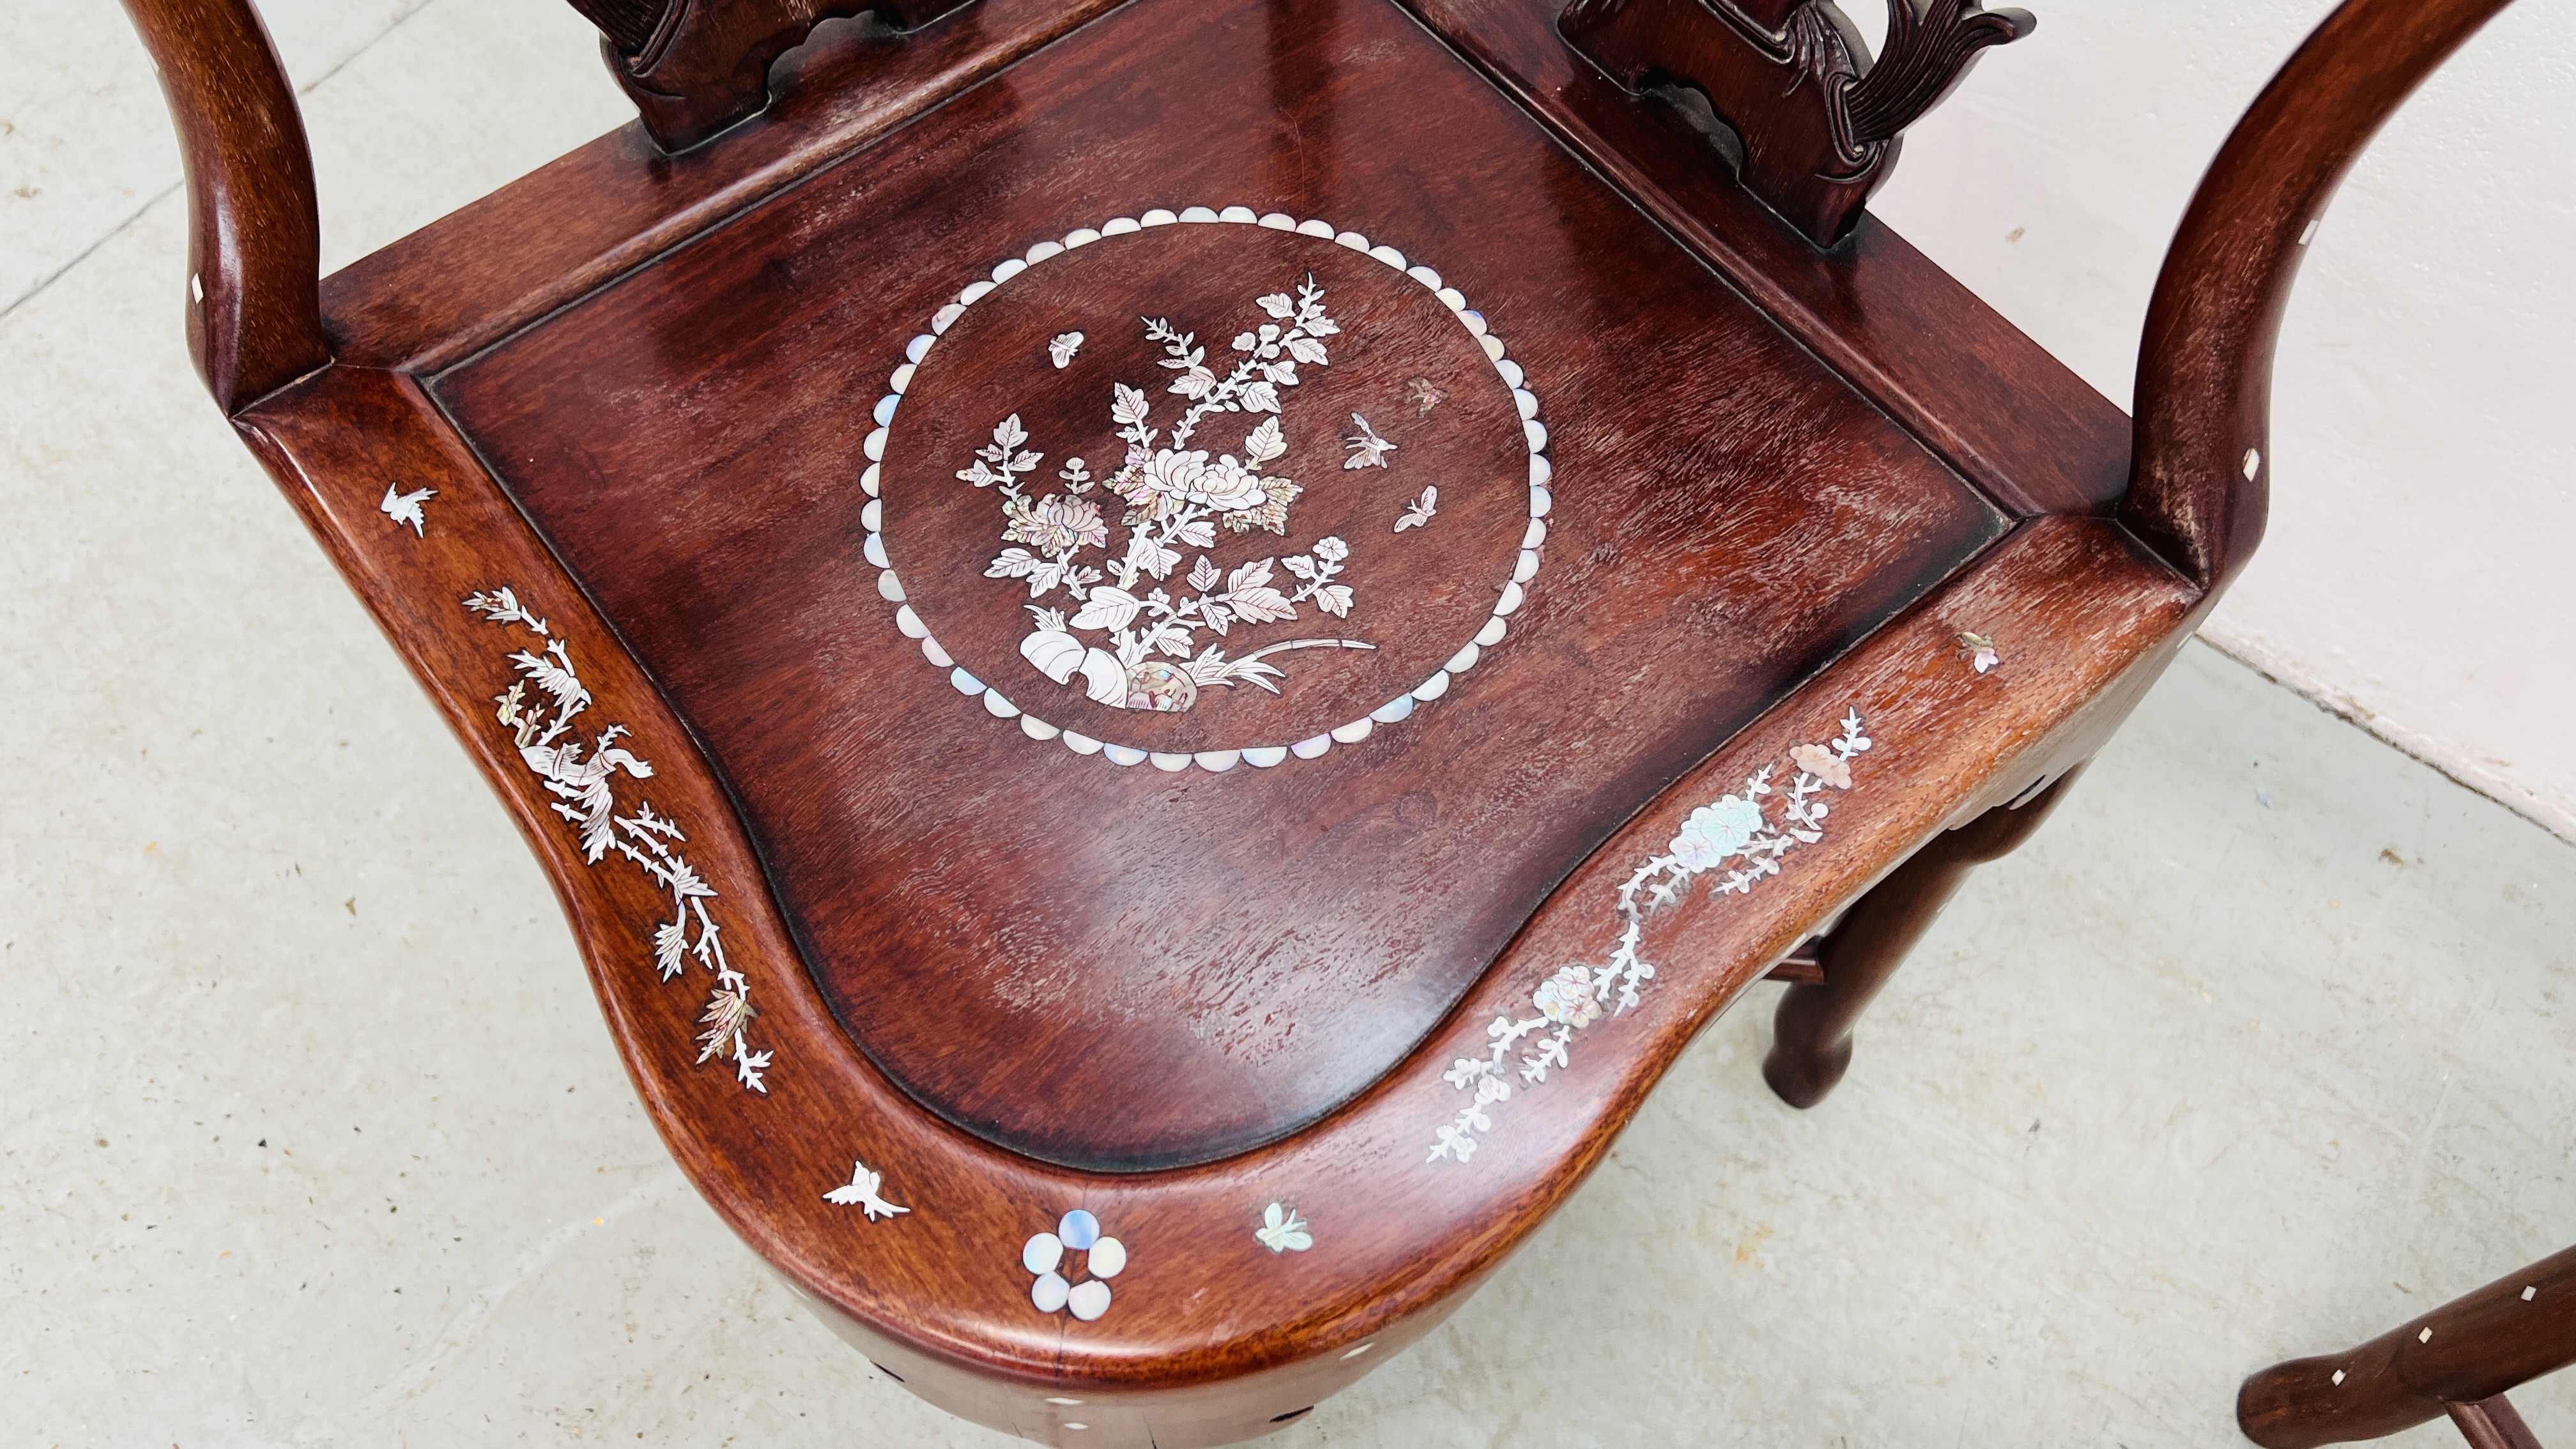 A PAIR OF ORIENTAL HARDWOOD AND MOTHER OF PEARL INLAID CORNER CHAIRS. - Image 11 of 14